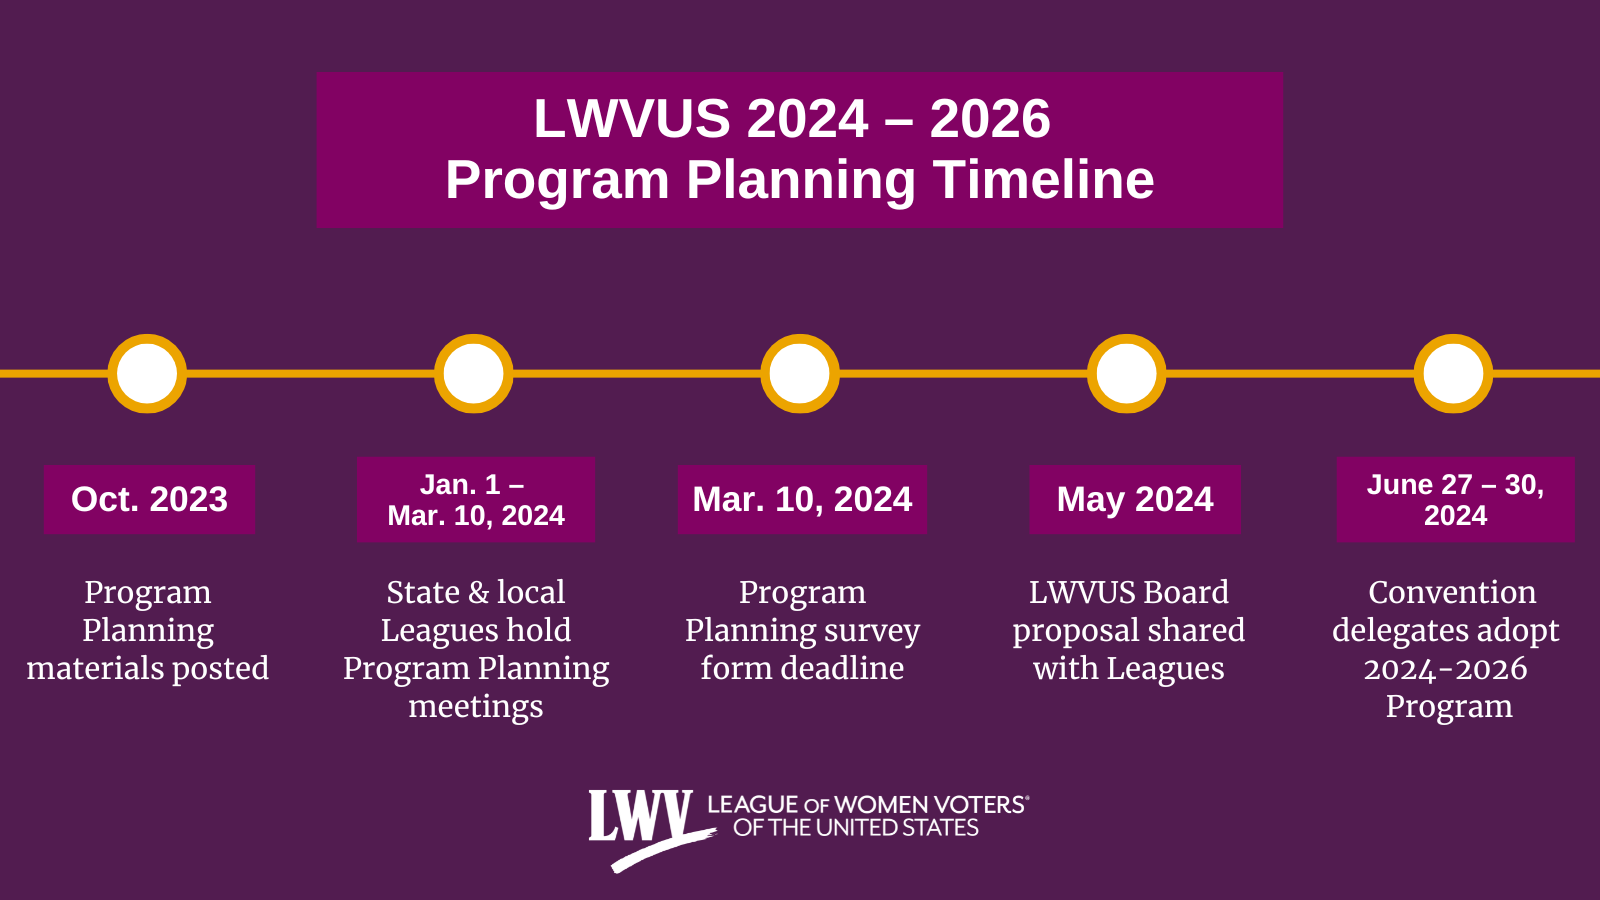 Image with a dark purple background. The image features a yellow timeline, with markers indicated as yellow and white circles on the line. There are five circles on the timeline. In a magenta box at the top of the image, there is white text: "LWVUS 2024-2026 Program Planning Timeline." Below this heading is the timeline. The first marker is "Oct. 2023: Program planning materials posted." The second marker is to the right, "Jan. 1 - Mar. 10, 2024: State and local Leagues hold program planning meetings." The third marker is to the right of the second, "Mar. 10, 2024: Program planning survey form deadline." The fourth marker is "May 2024: LWVUS Board proposal shared with Leagues." The fifth marker is the final one, to the right of the image. It says "June 27-30, 2024: Convention delegates adopt 2024-2026 program." There is the white LWVUS logo at the bottom of the image.